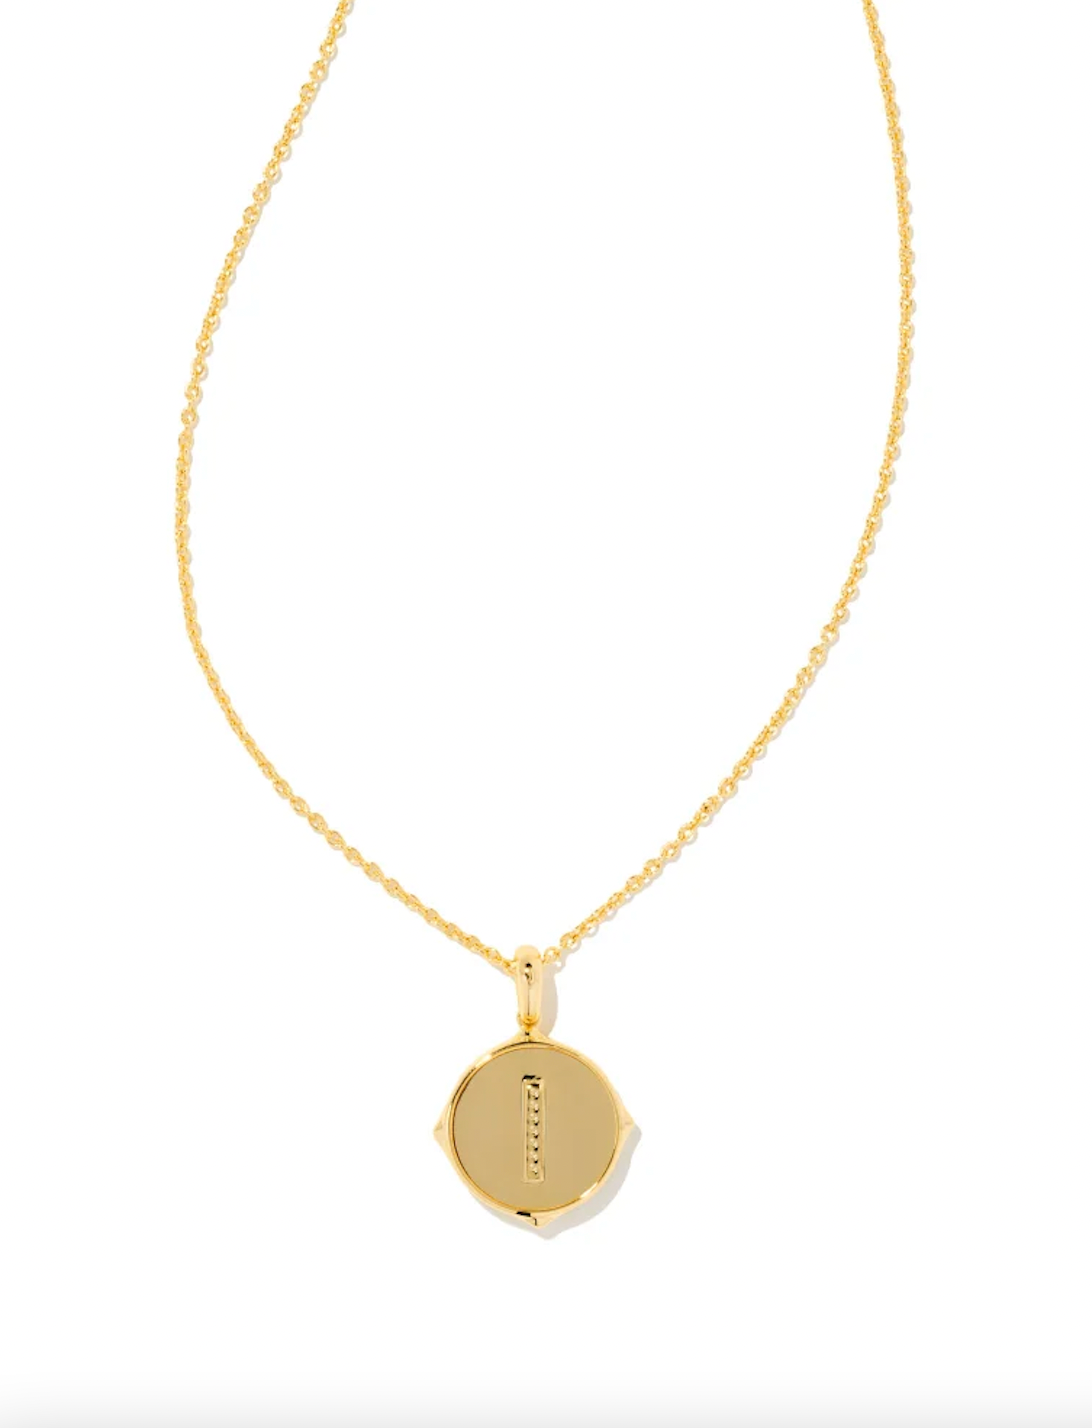 Kendra Scott Letter M Gold Disc Pendant Necklace in Iridescent Abalone –  The Bugs Ear